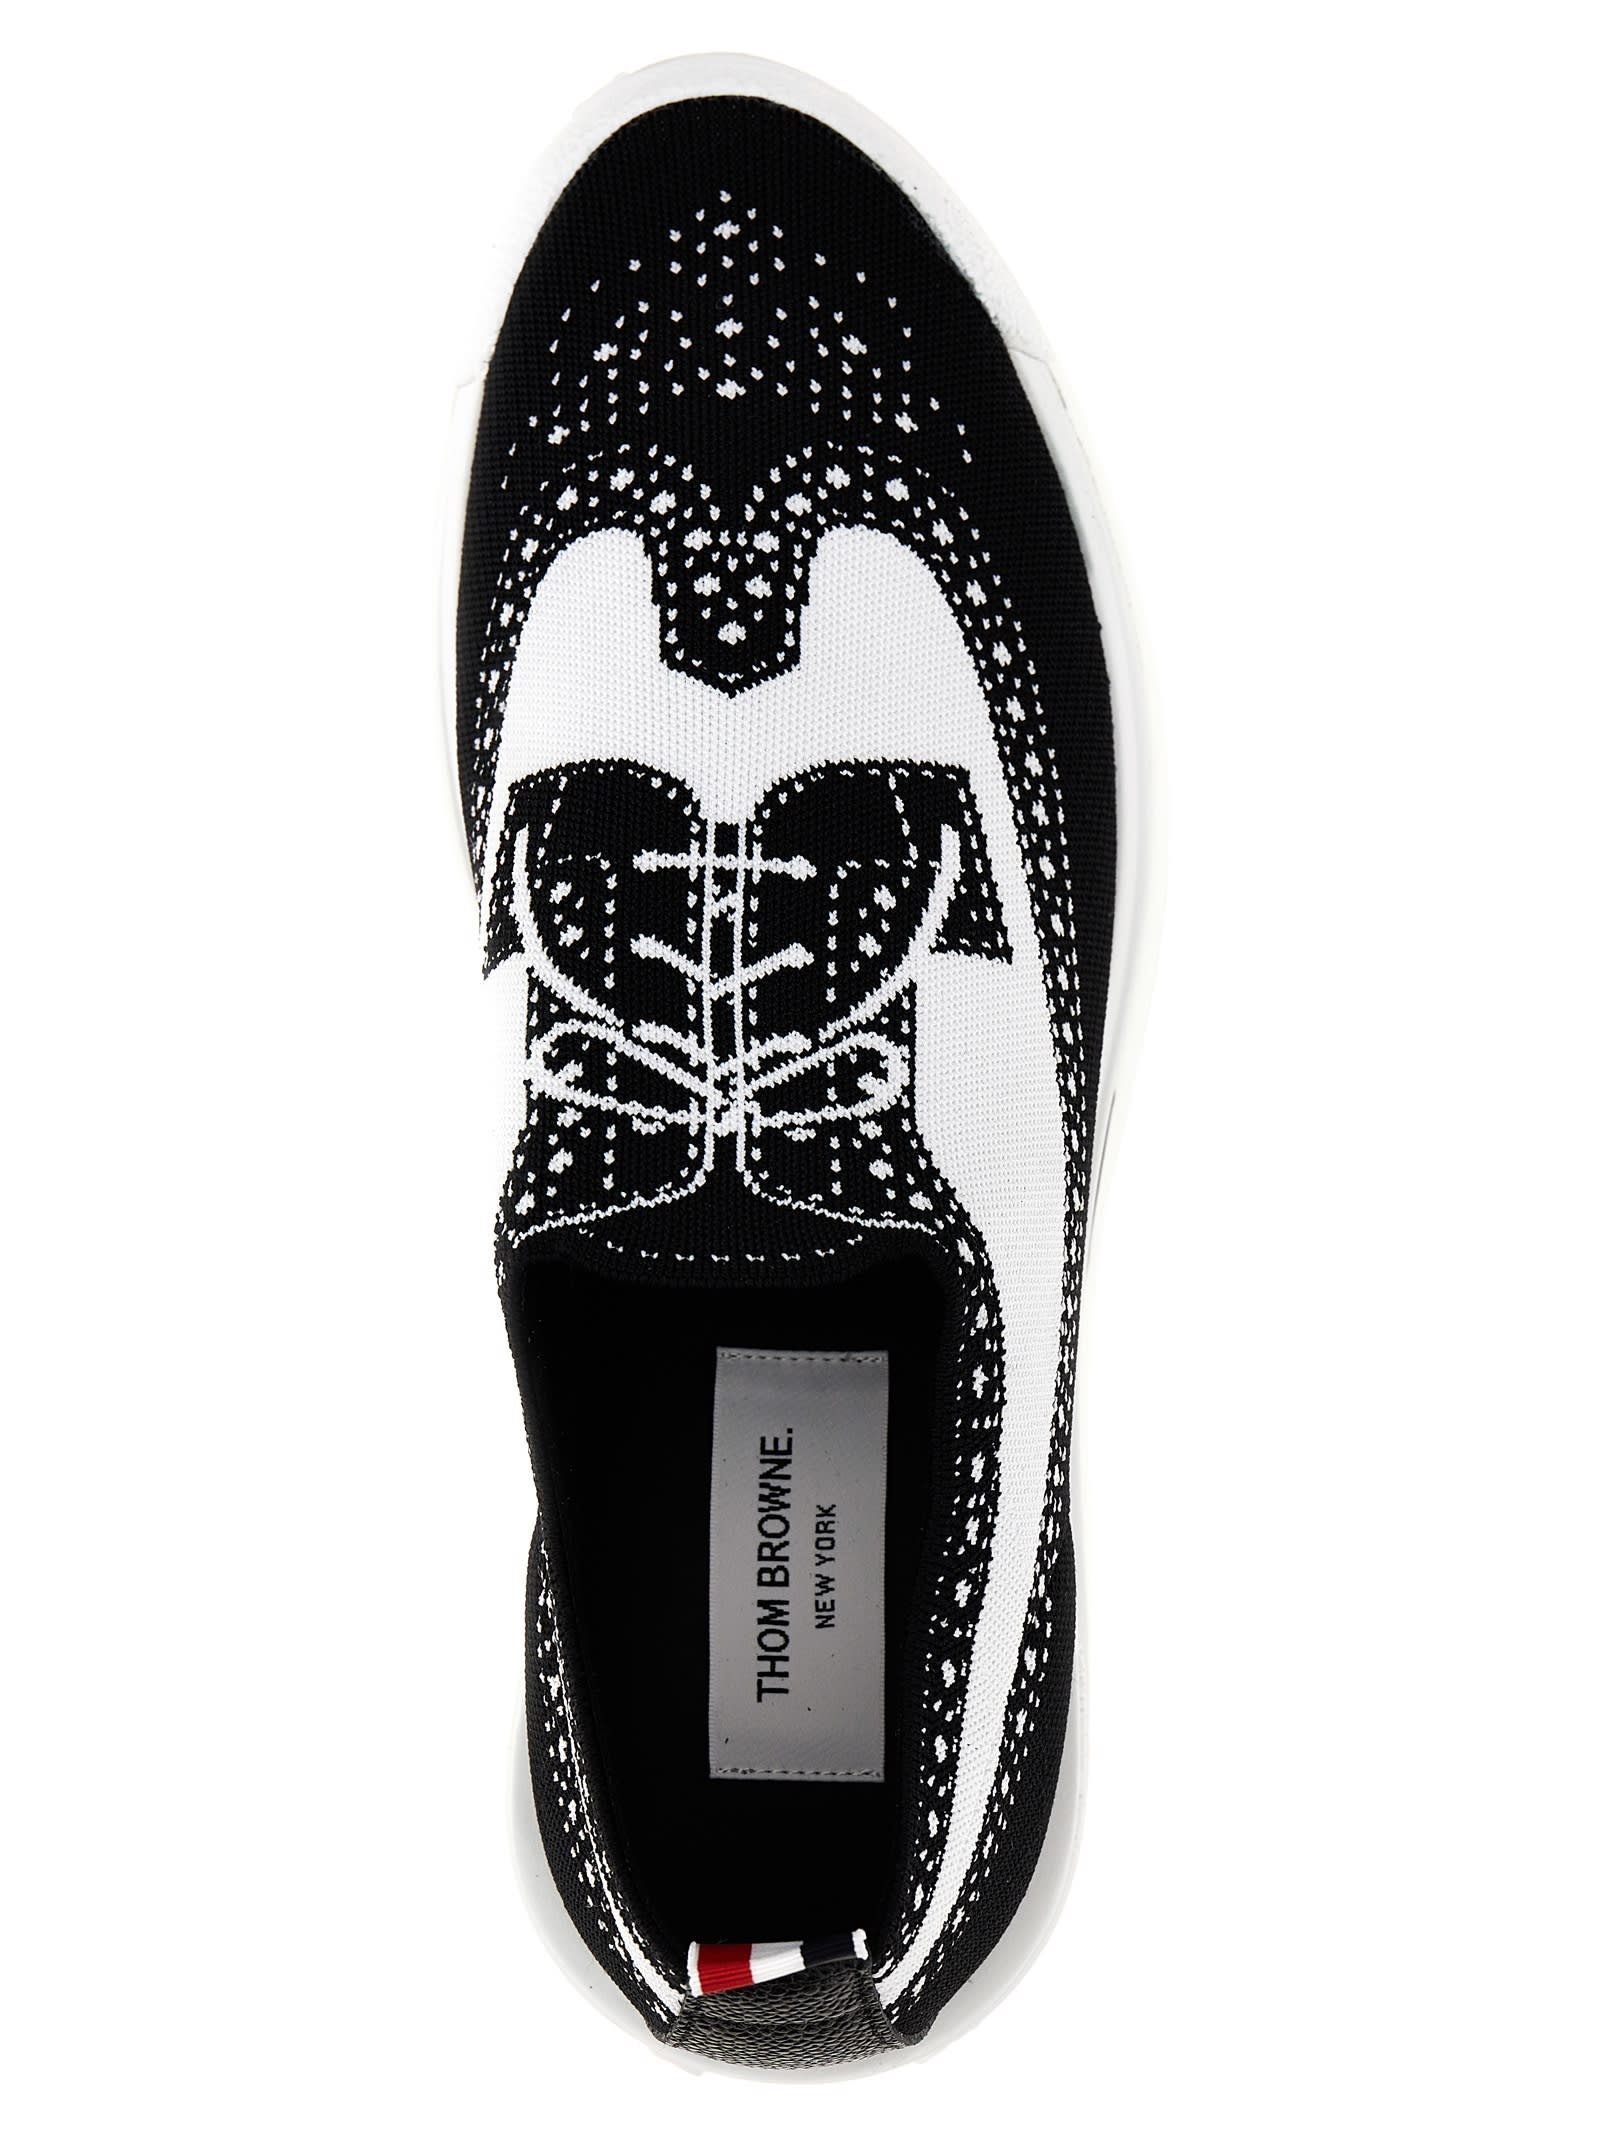 Shop Thom Browne Longwing Brouge Sneakers In White/black